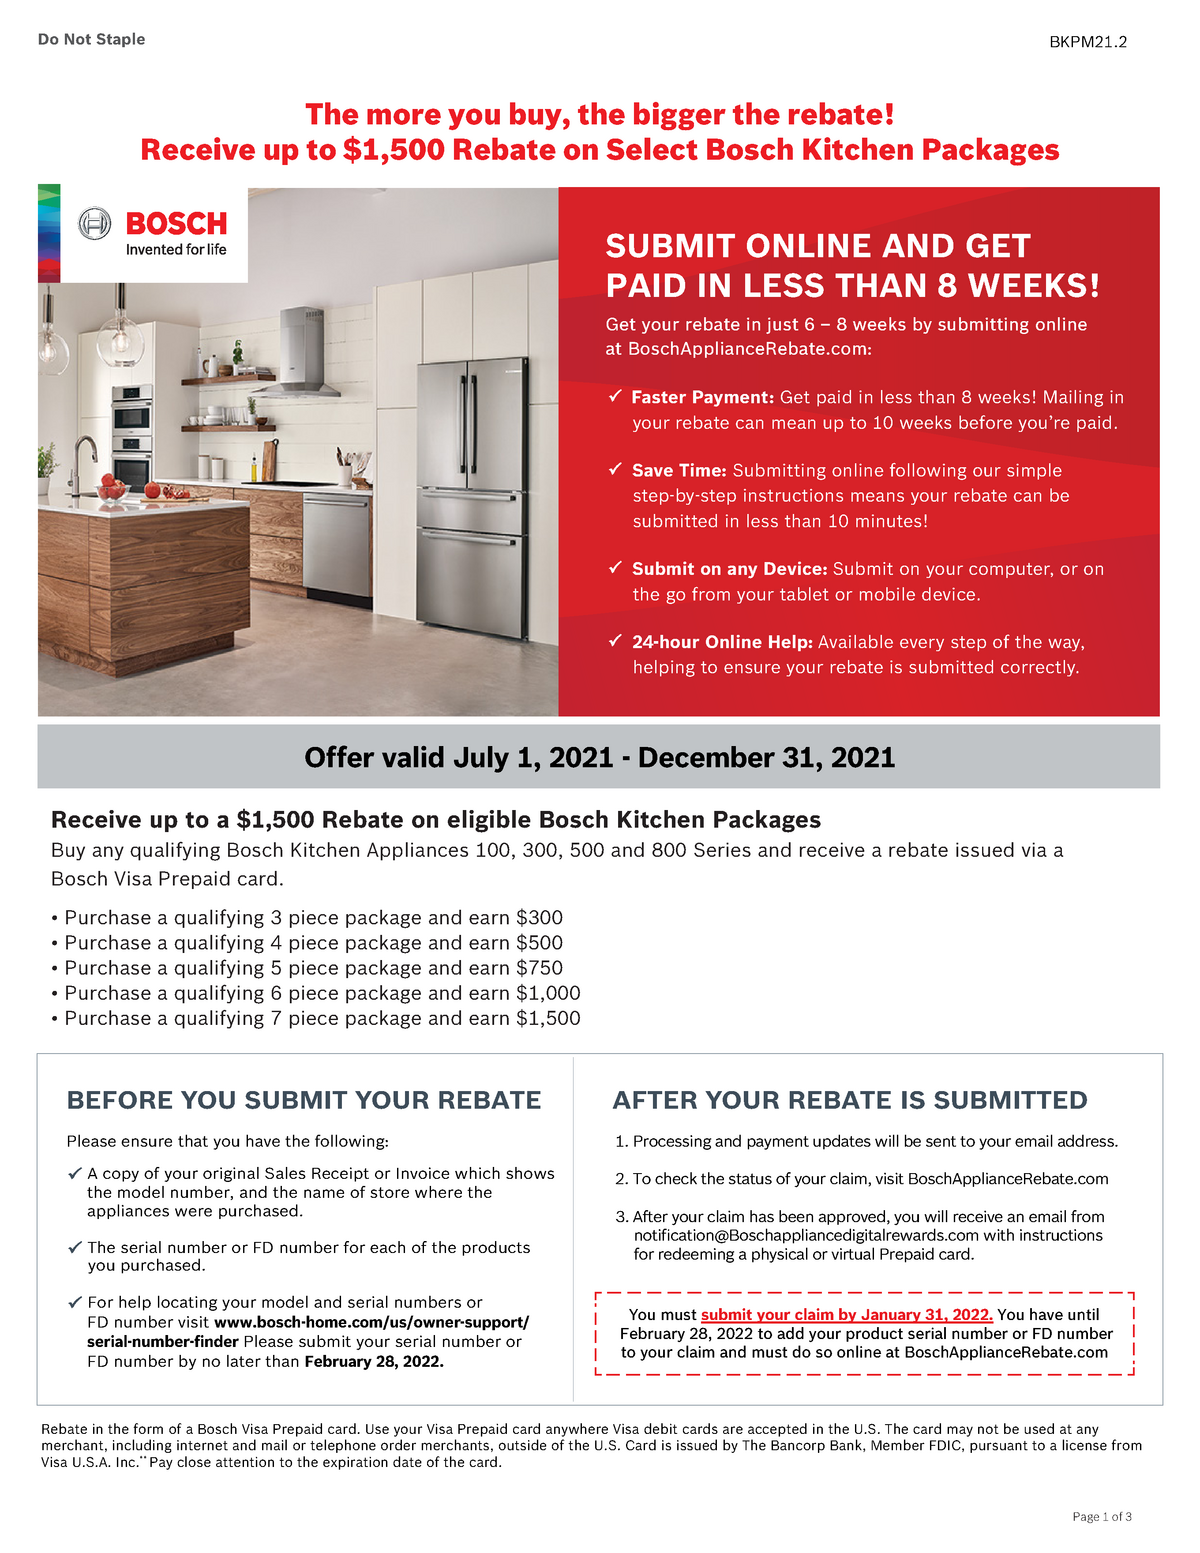 bosch-mainline-kitchen-package-rebate-070121-123121-page-1-of-3-do